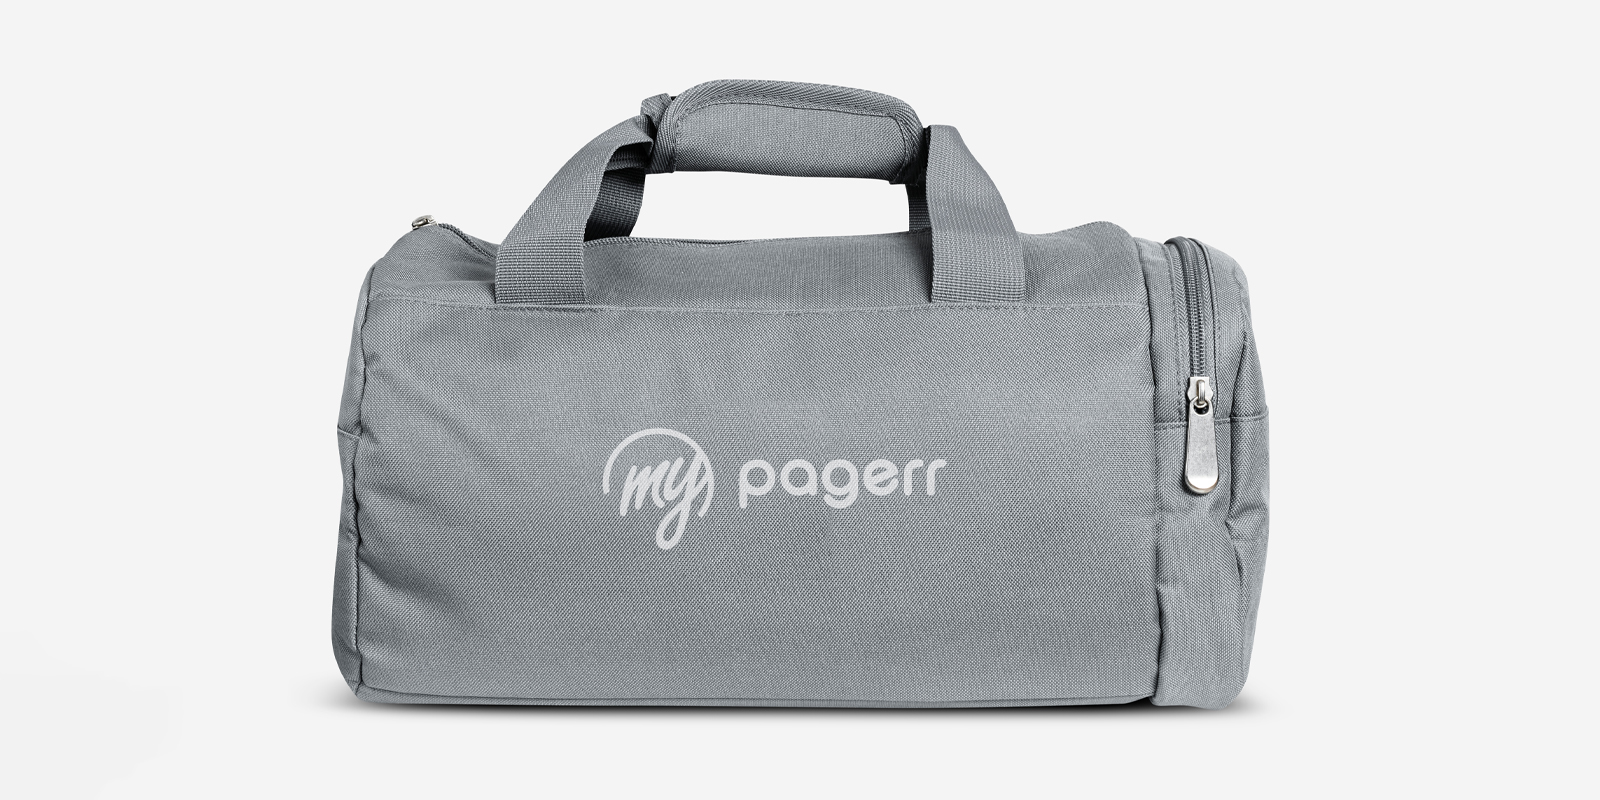 Duffel & gym bags in Munich - Print with Pagerr